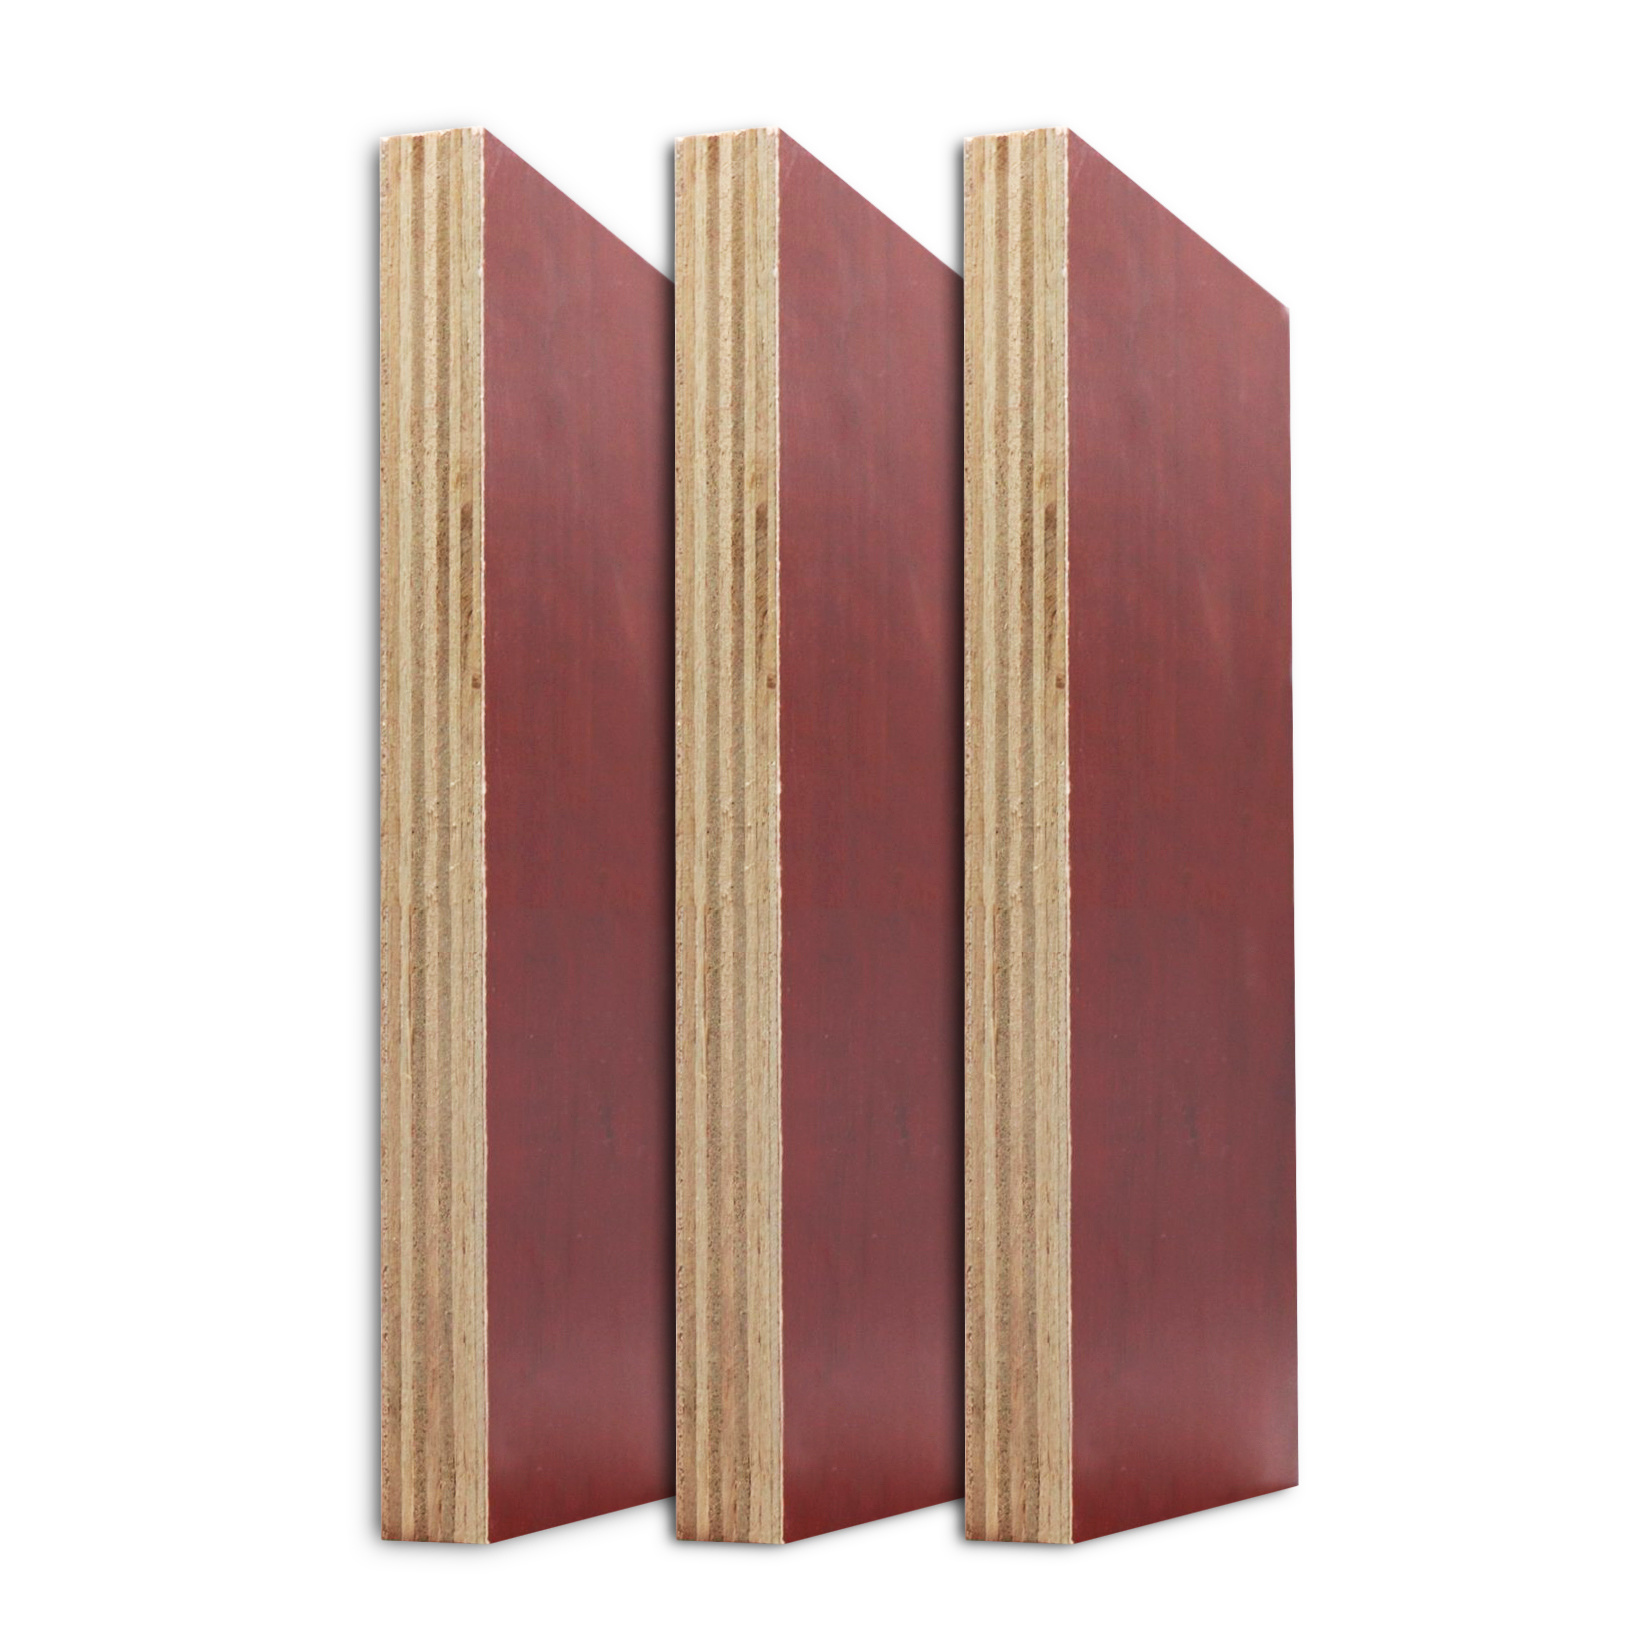 Red Melamine Film Faced Plywood 18mm Laminated Ply Wood Board for Construction